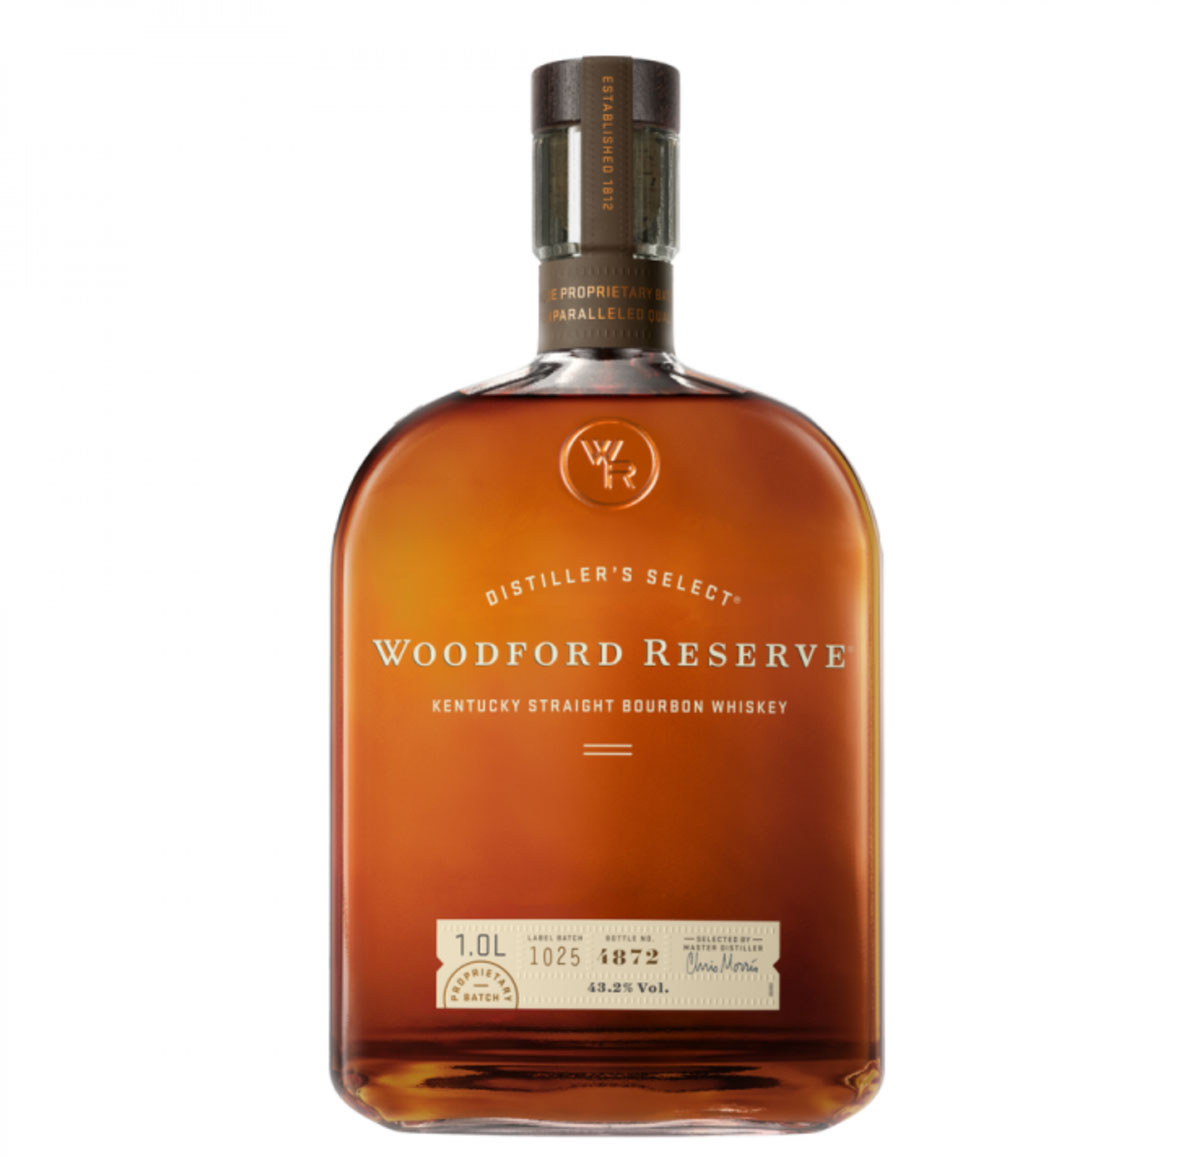 The Best Bourbon Whiskey Woodford Reserve The Best Whiskey for Your Home Bar